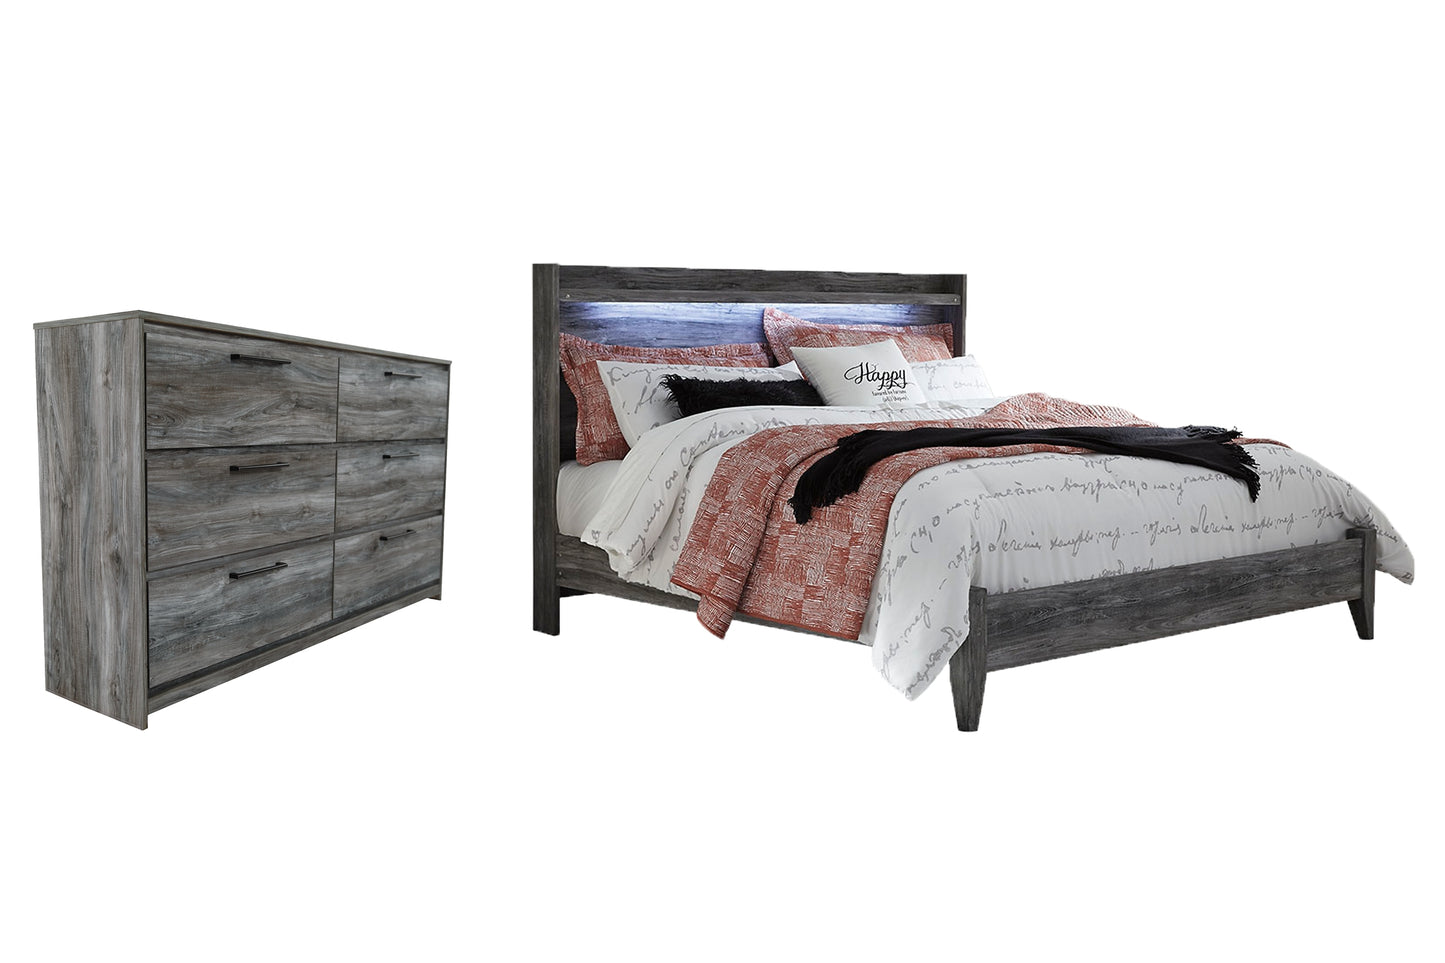 Baystorm King Panel Bed with Dresser